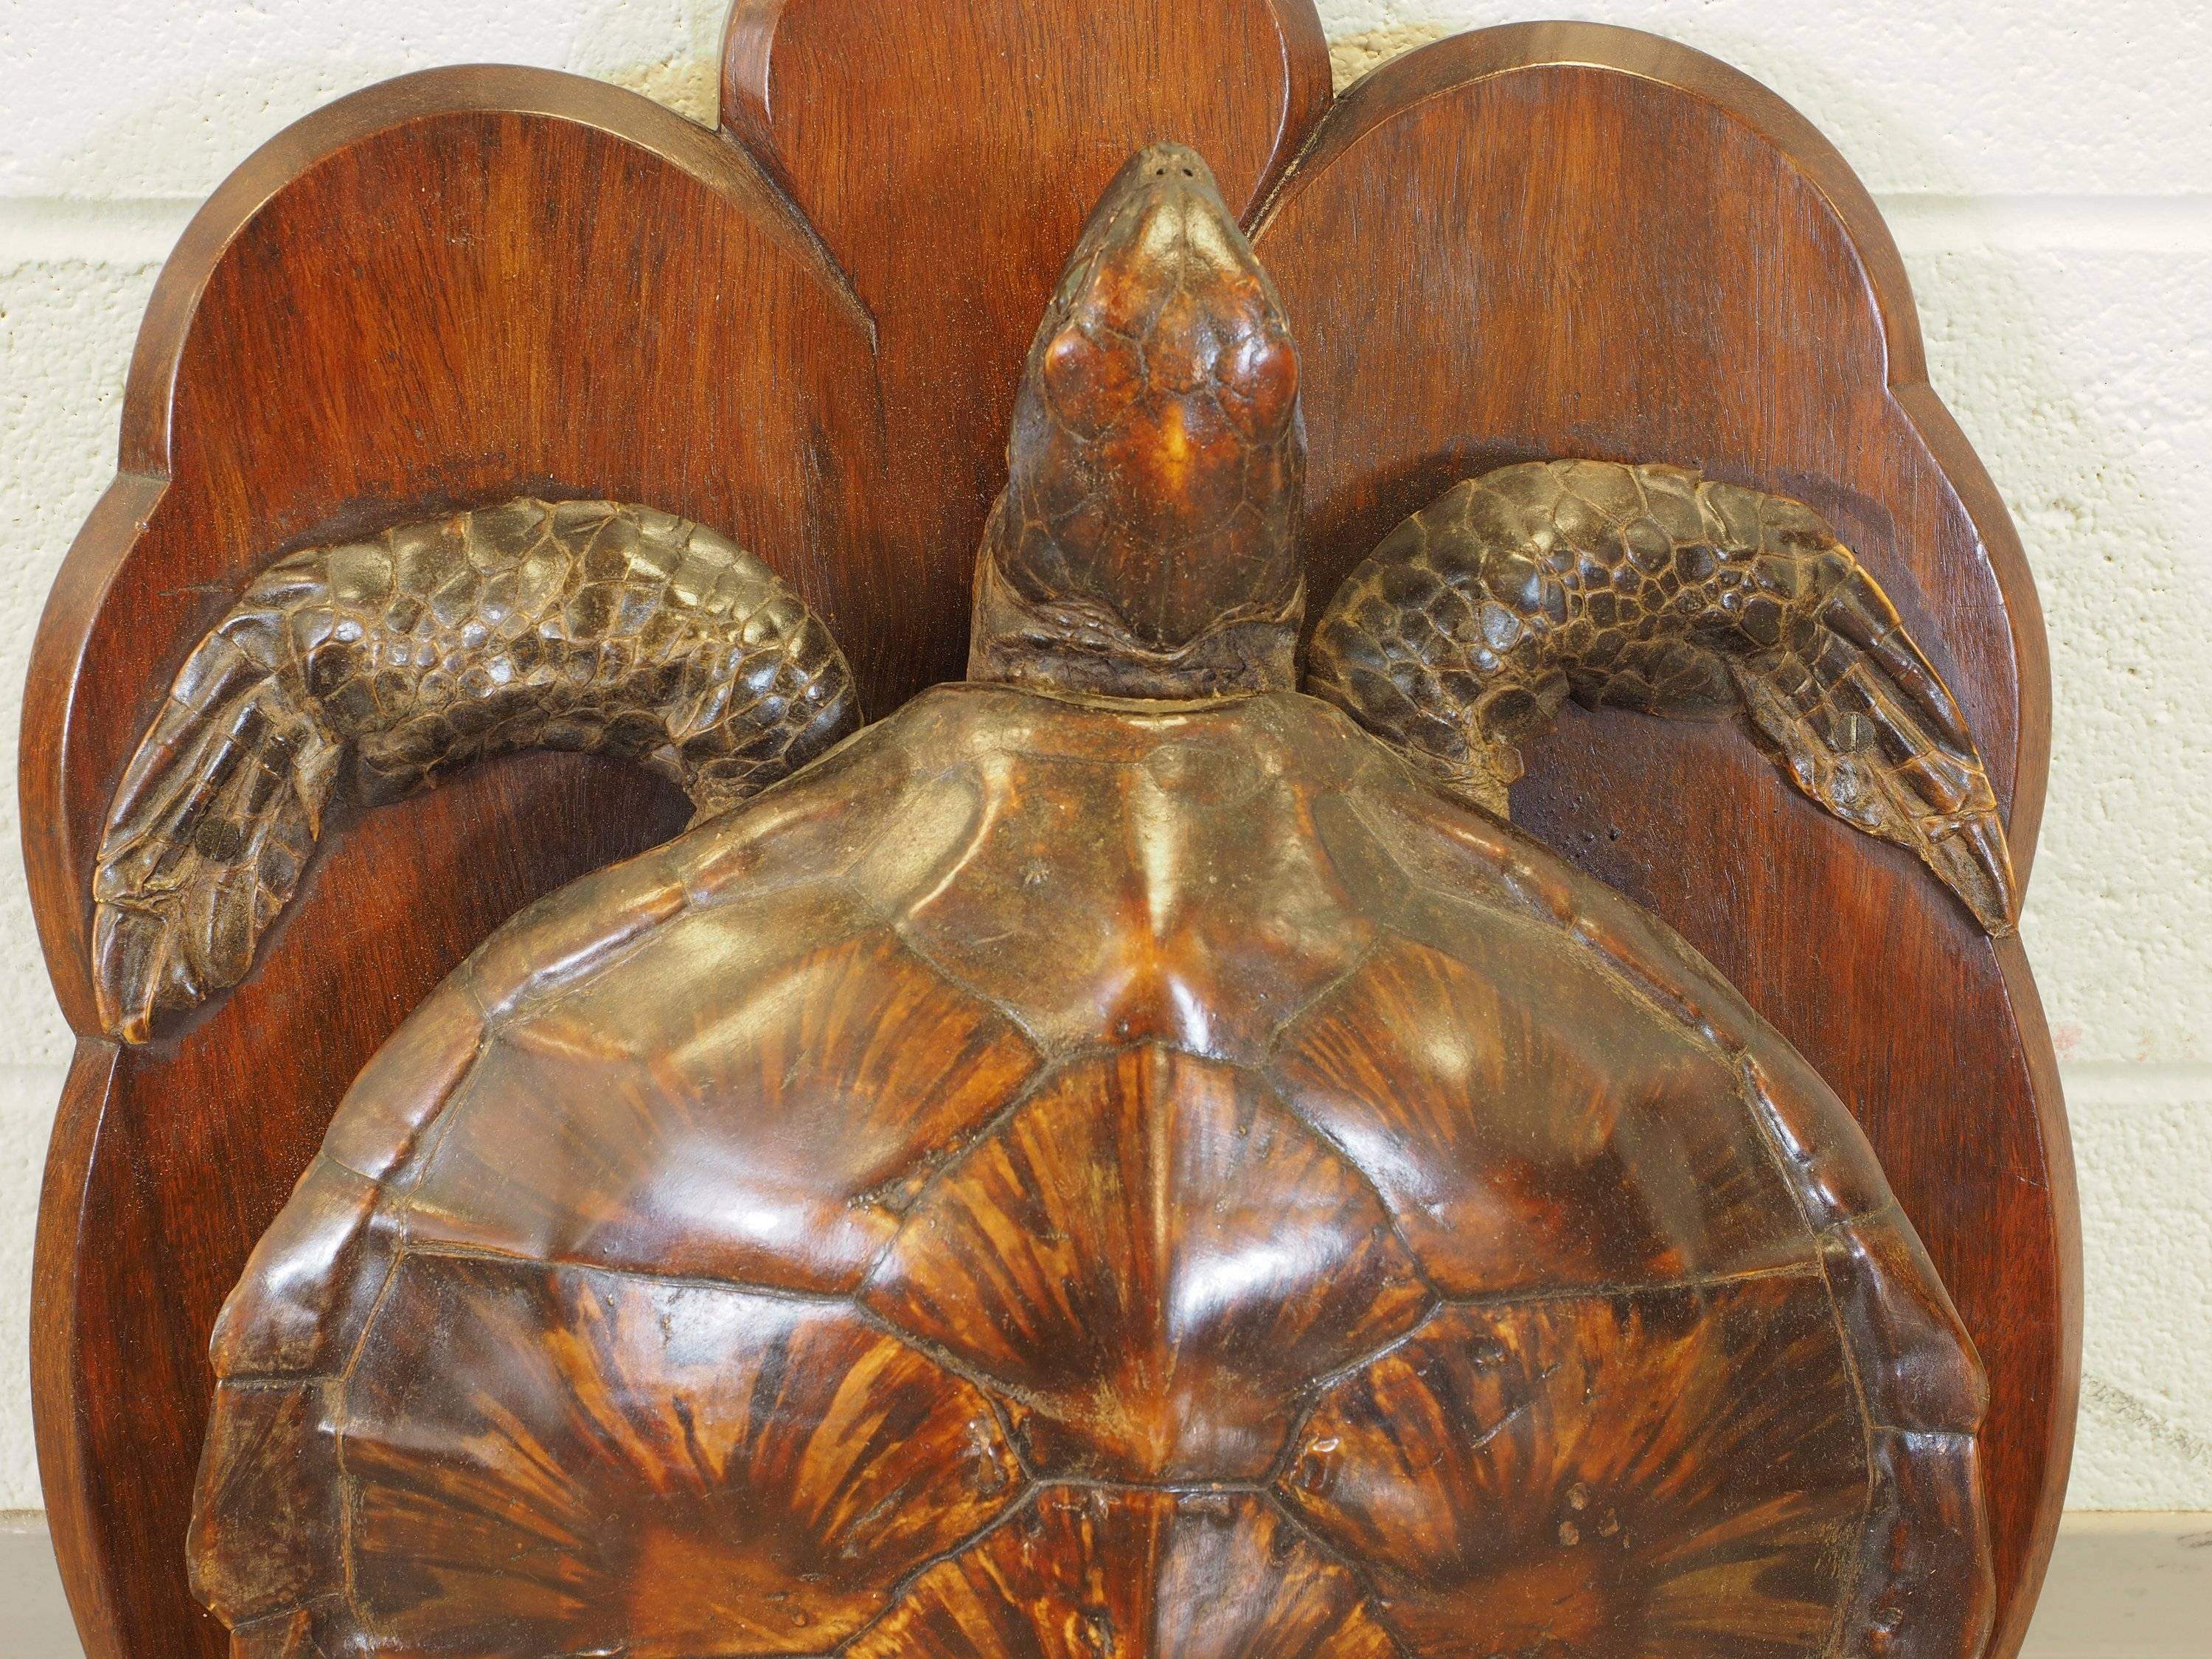 In very good condition with custom wood board mount. While the board is made to hang, the tortoise is equally effective as a table or shelf display.